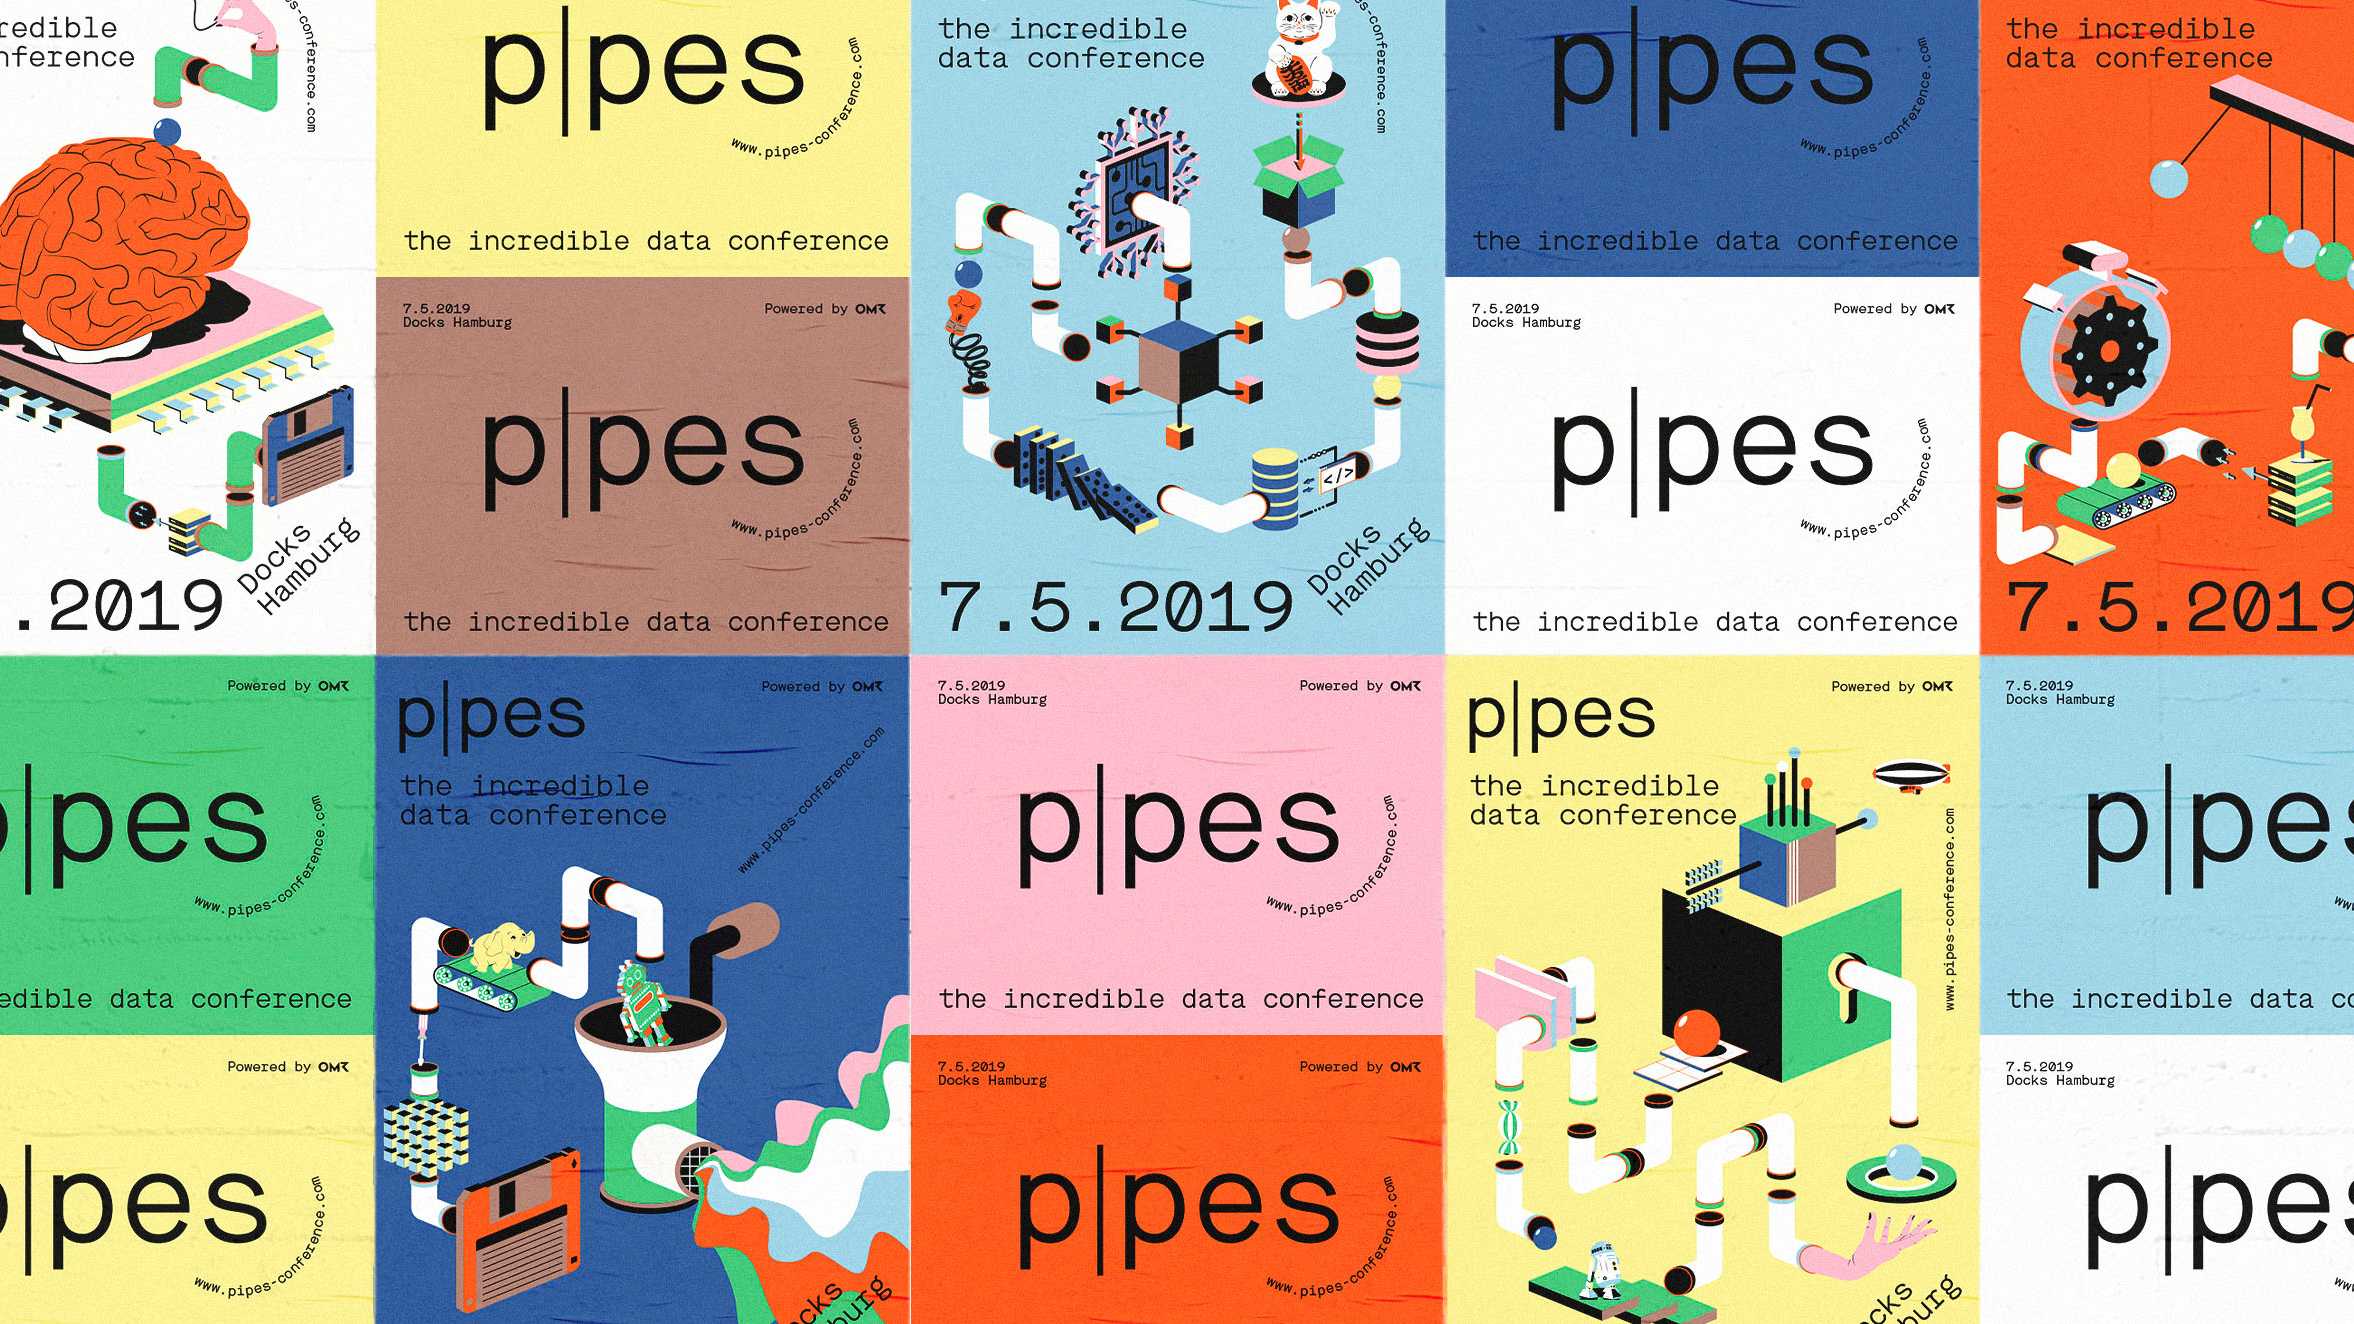 posterwall with different posters in pipes visual identity